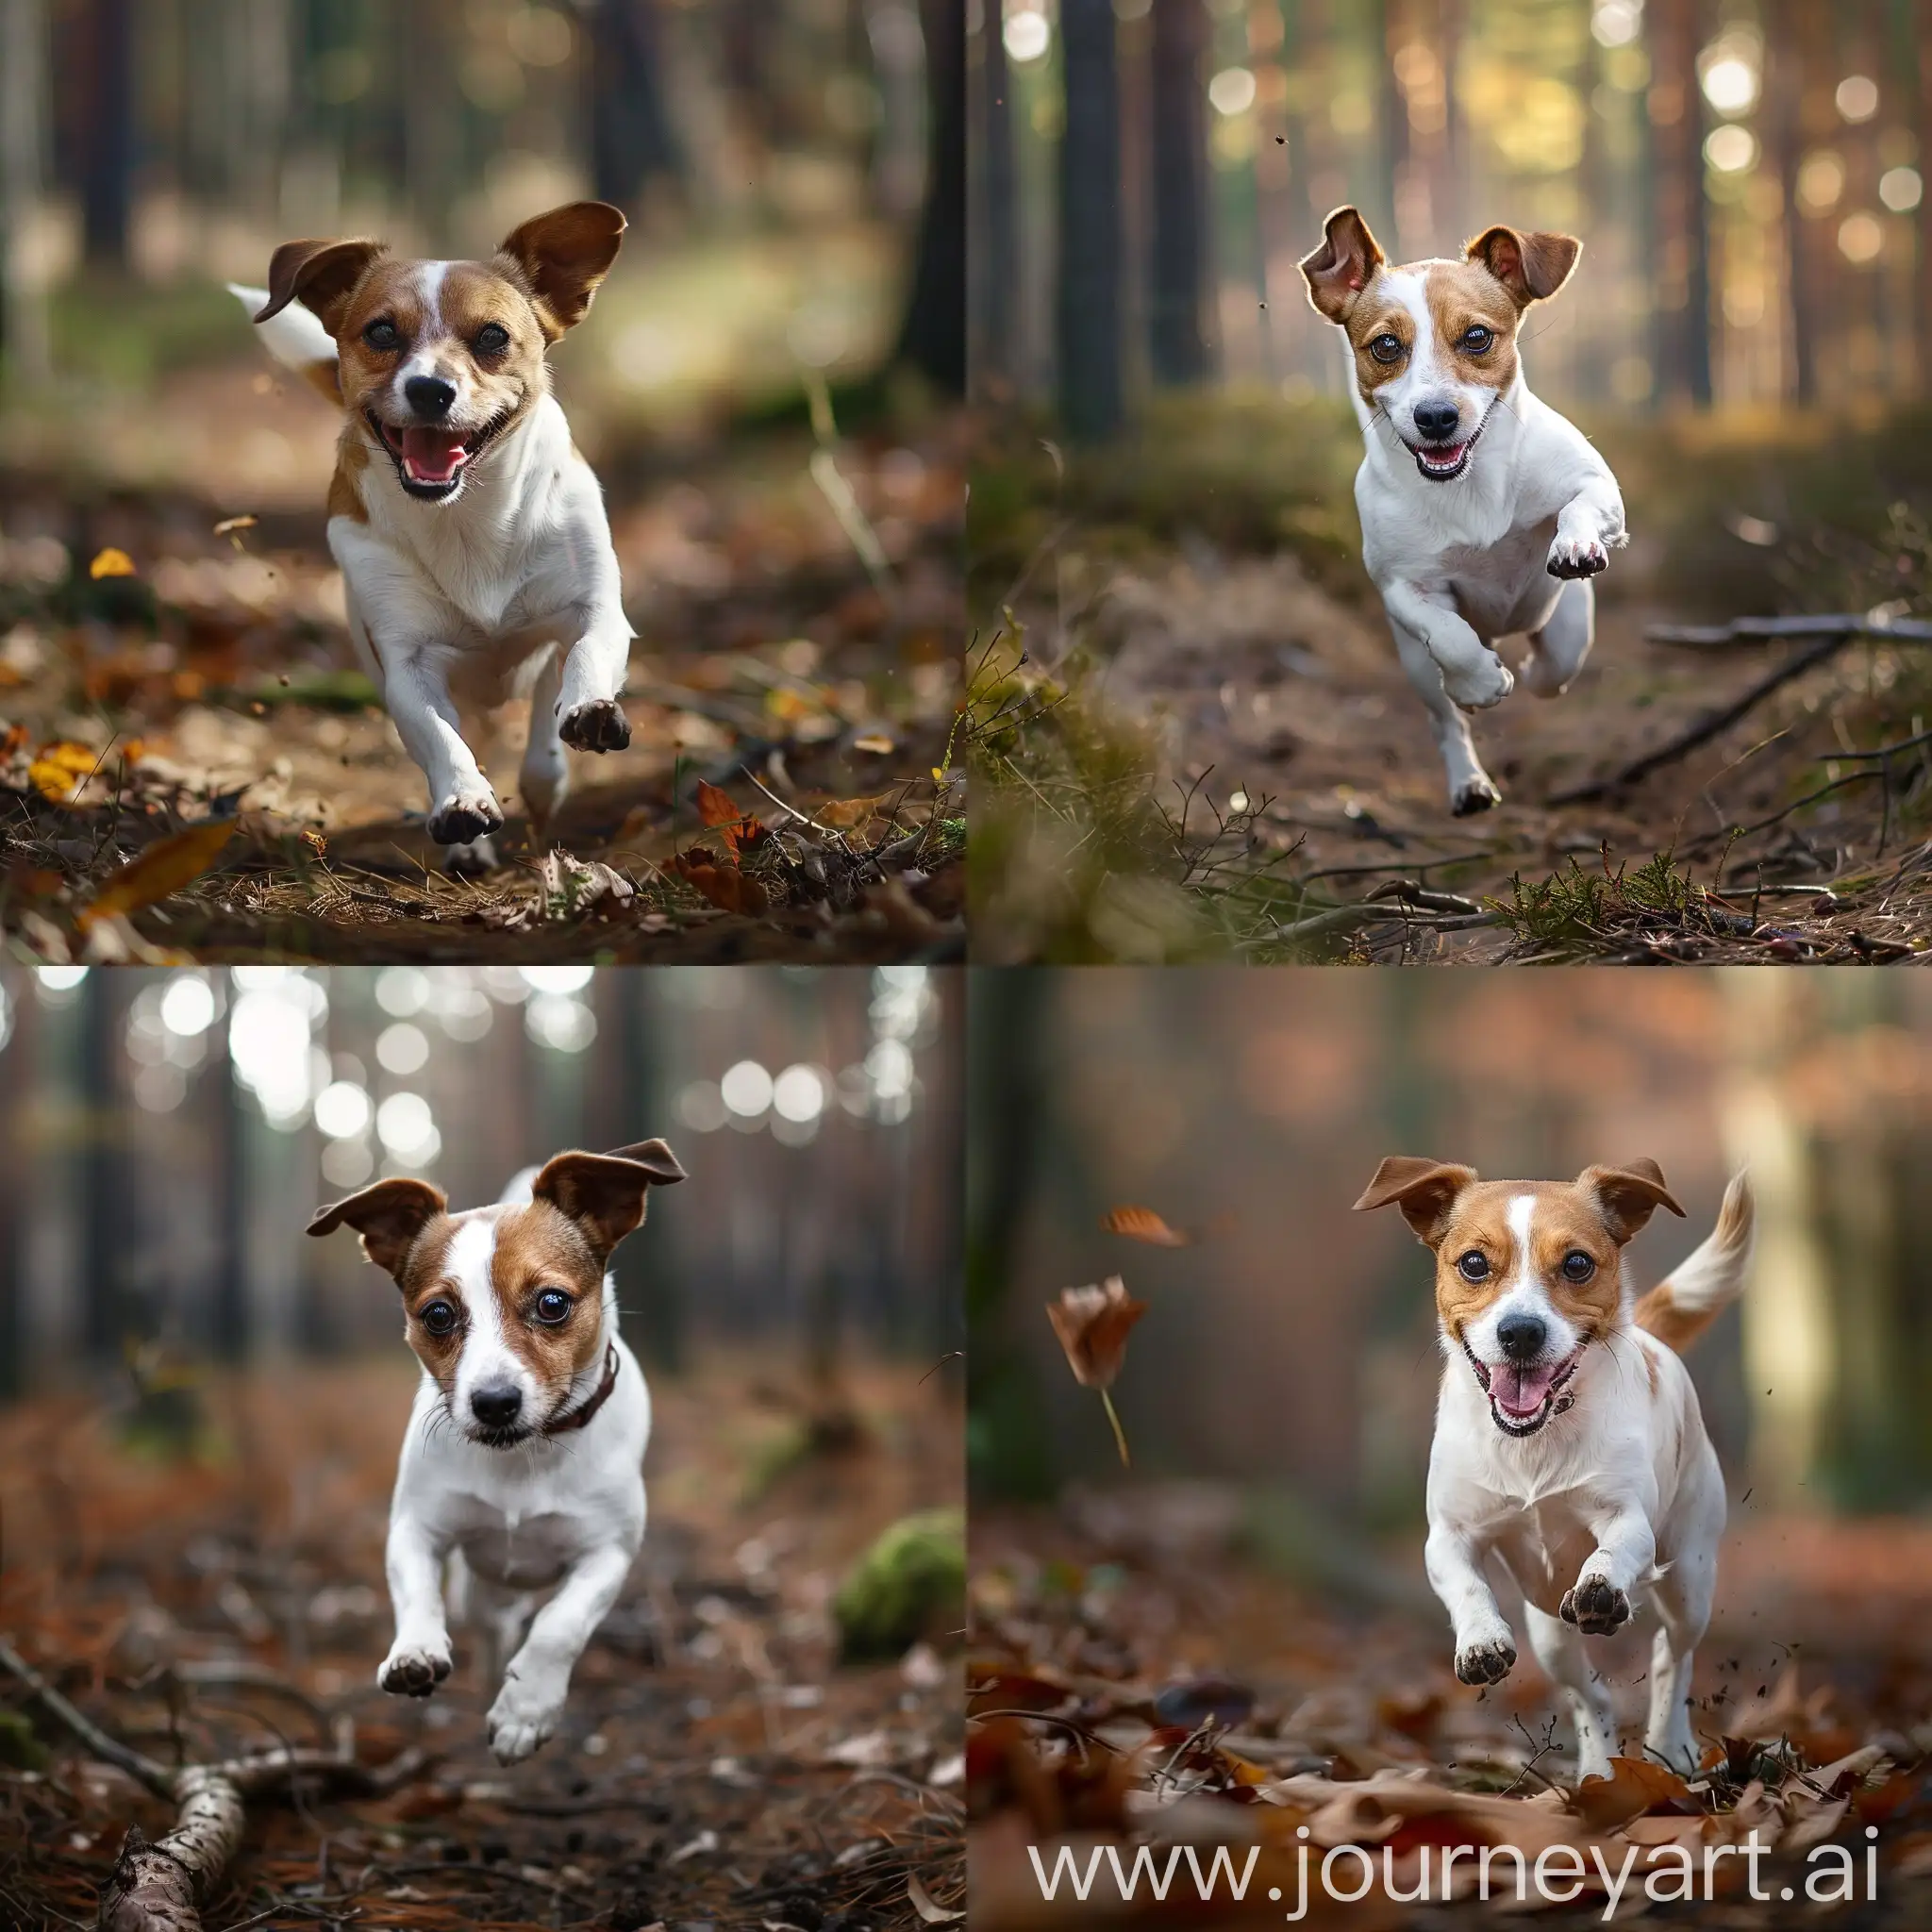 Jack-Russell-Dog-Running-in-a-Lush-Forest-Scene